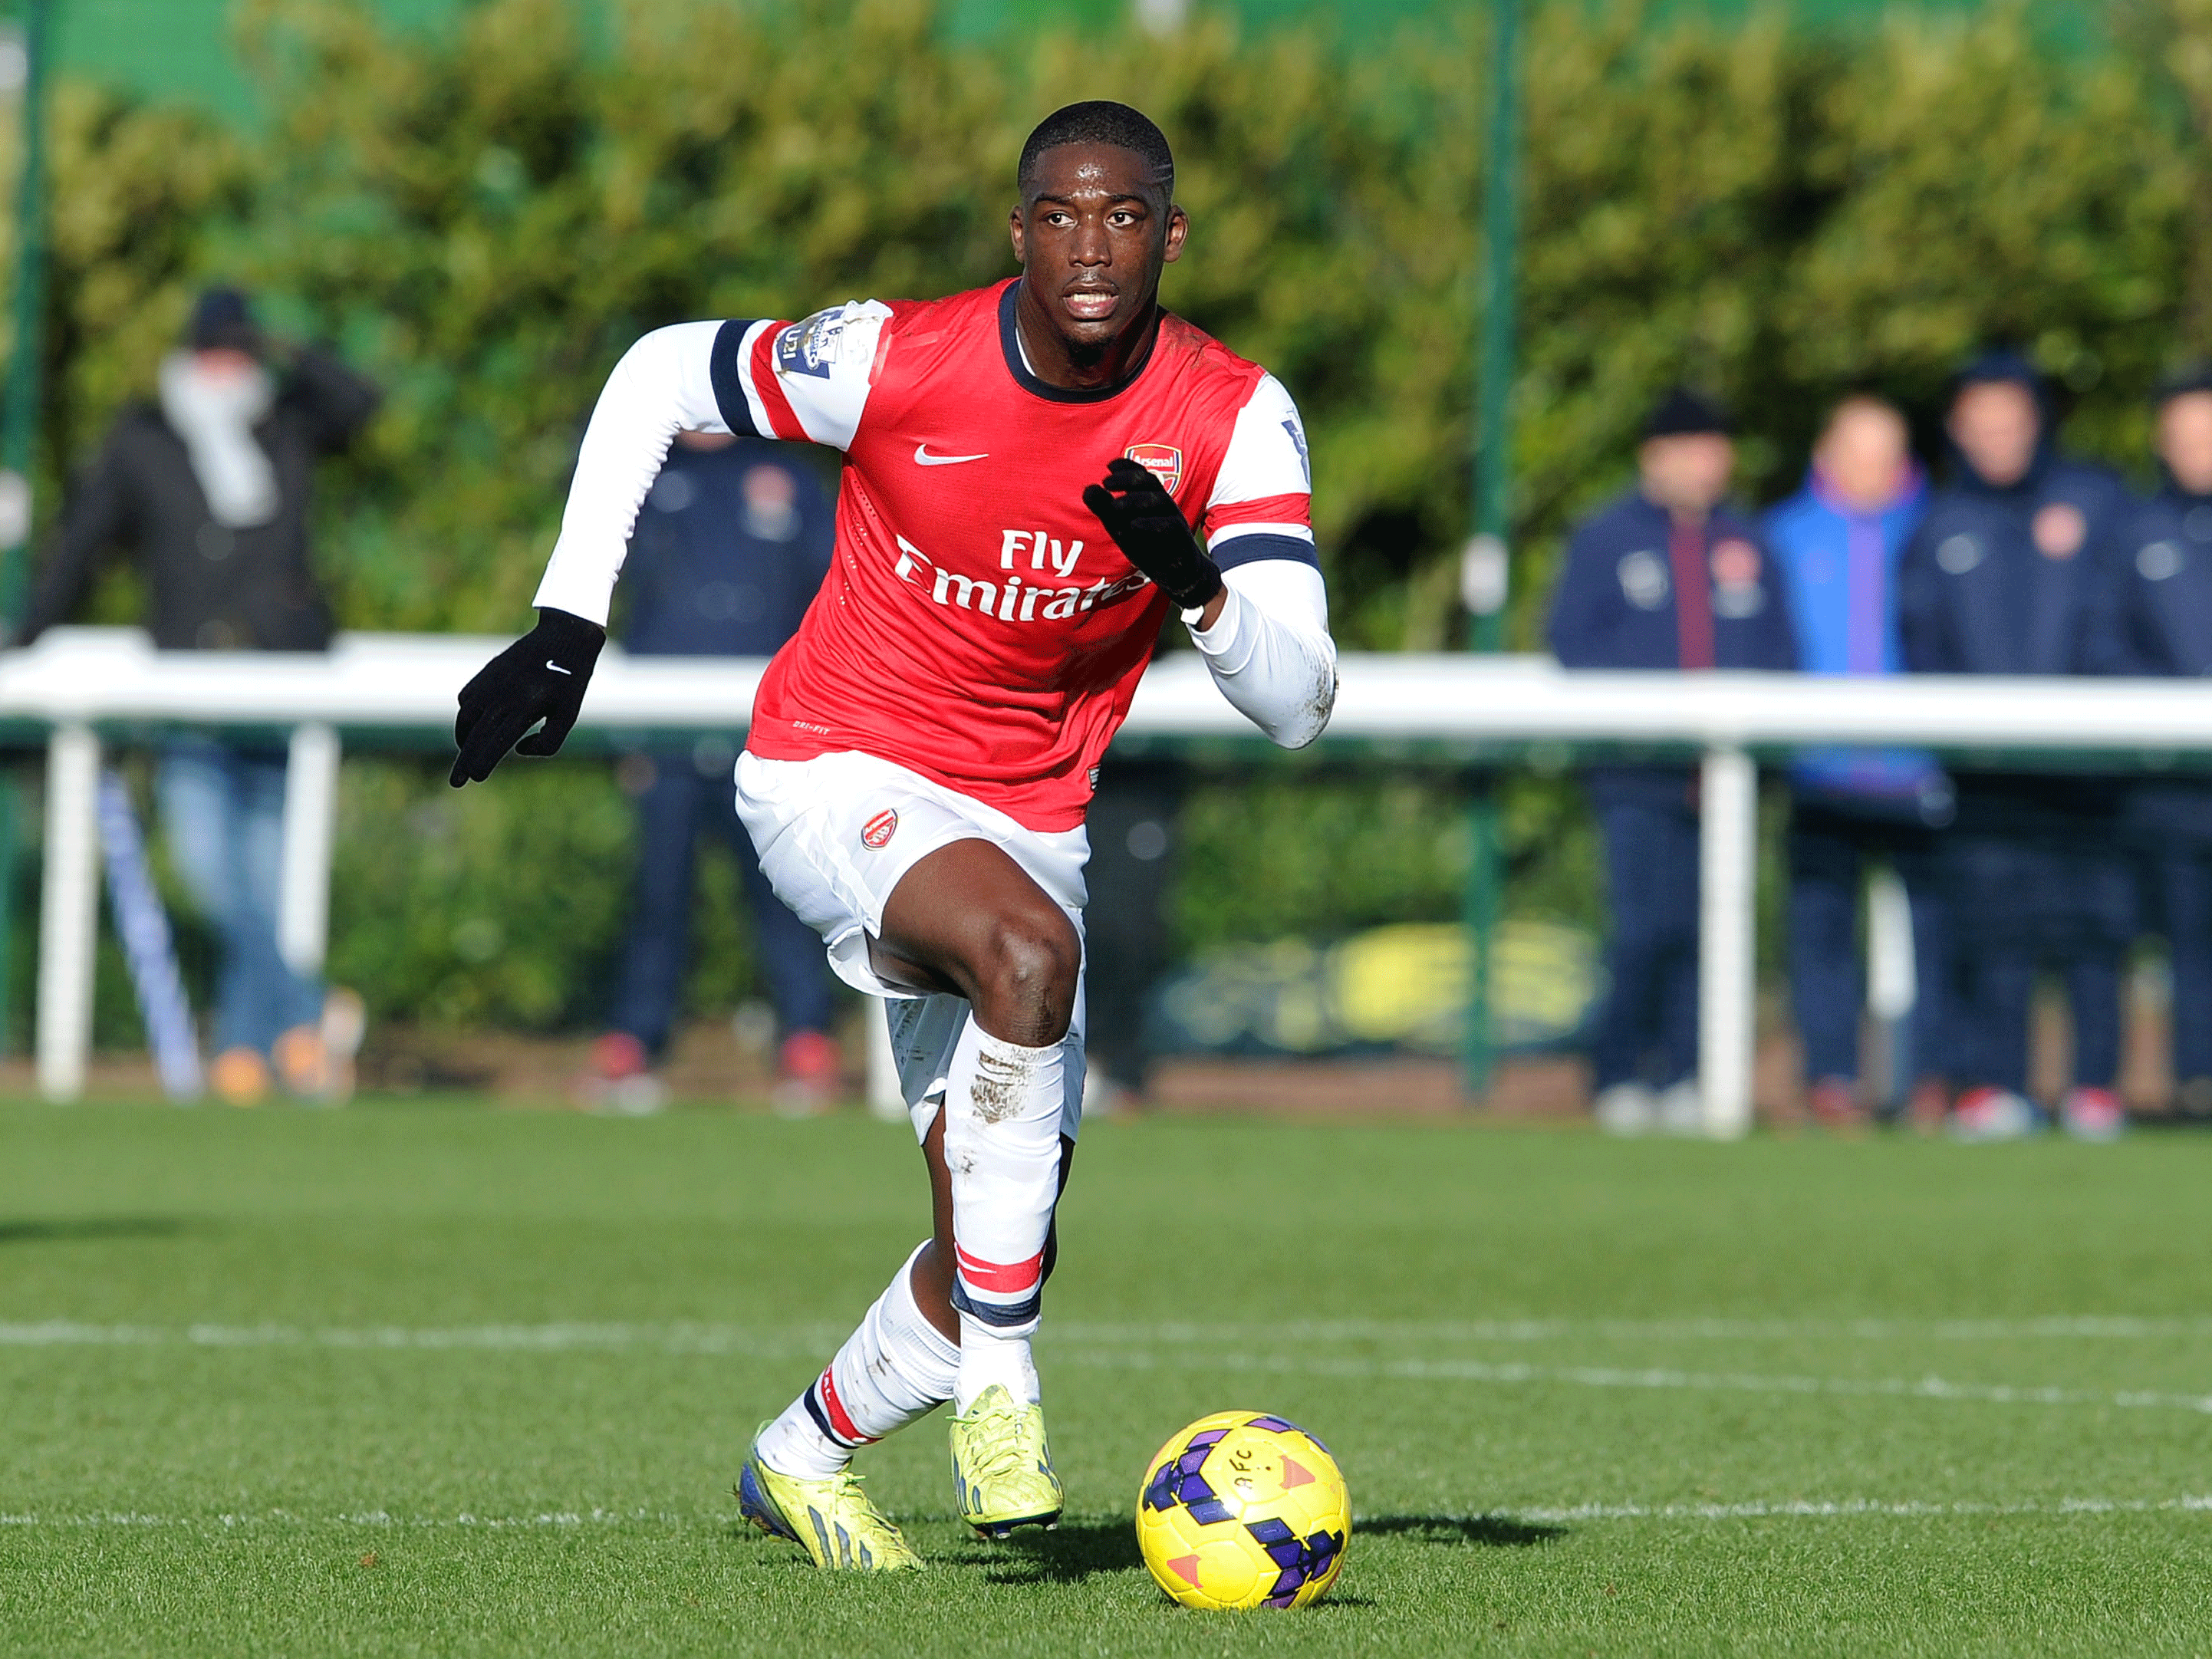 Sanogo in action in an Arsenal reserve match